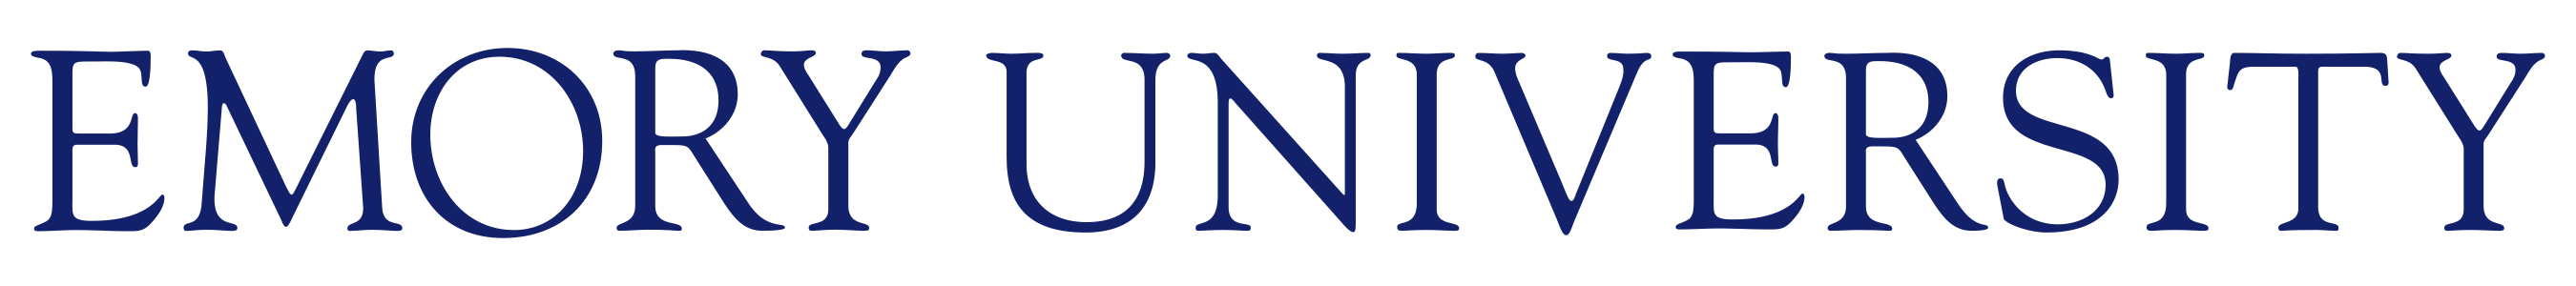 emory one-line logo without shield